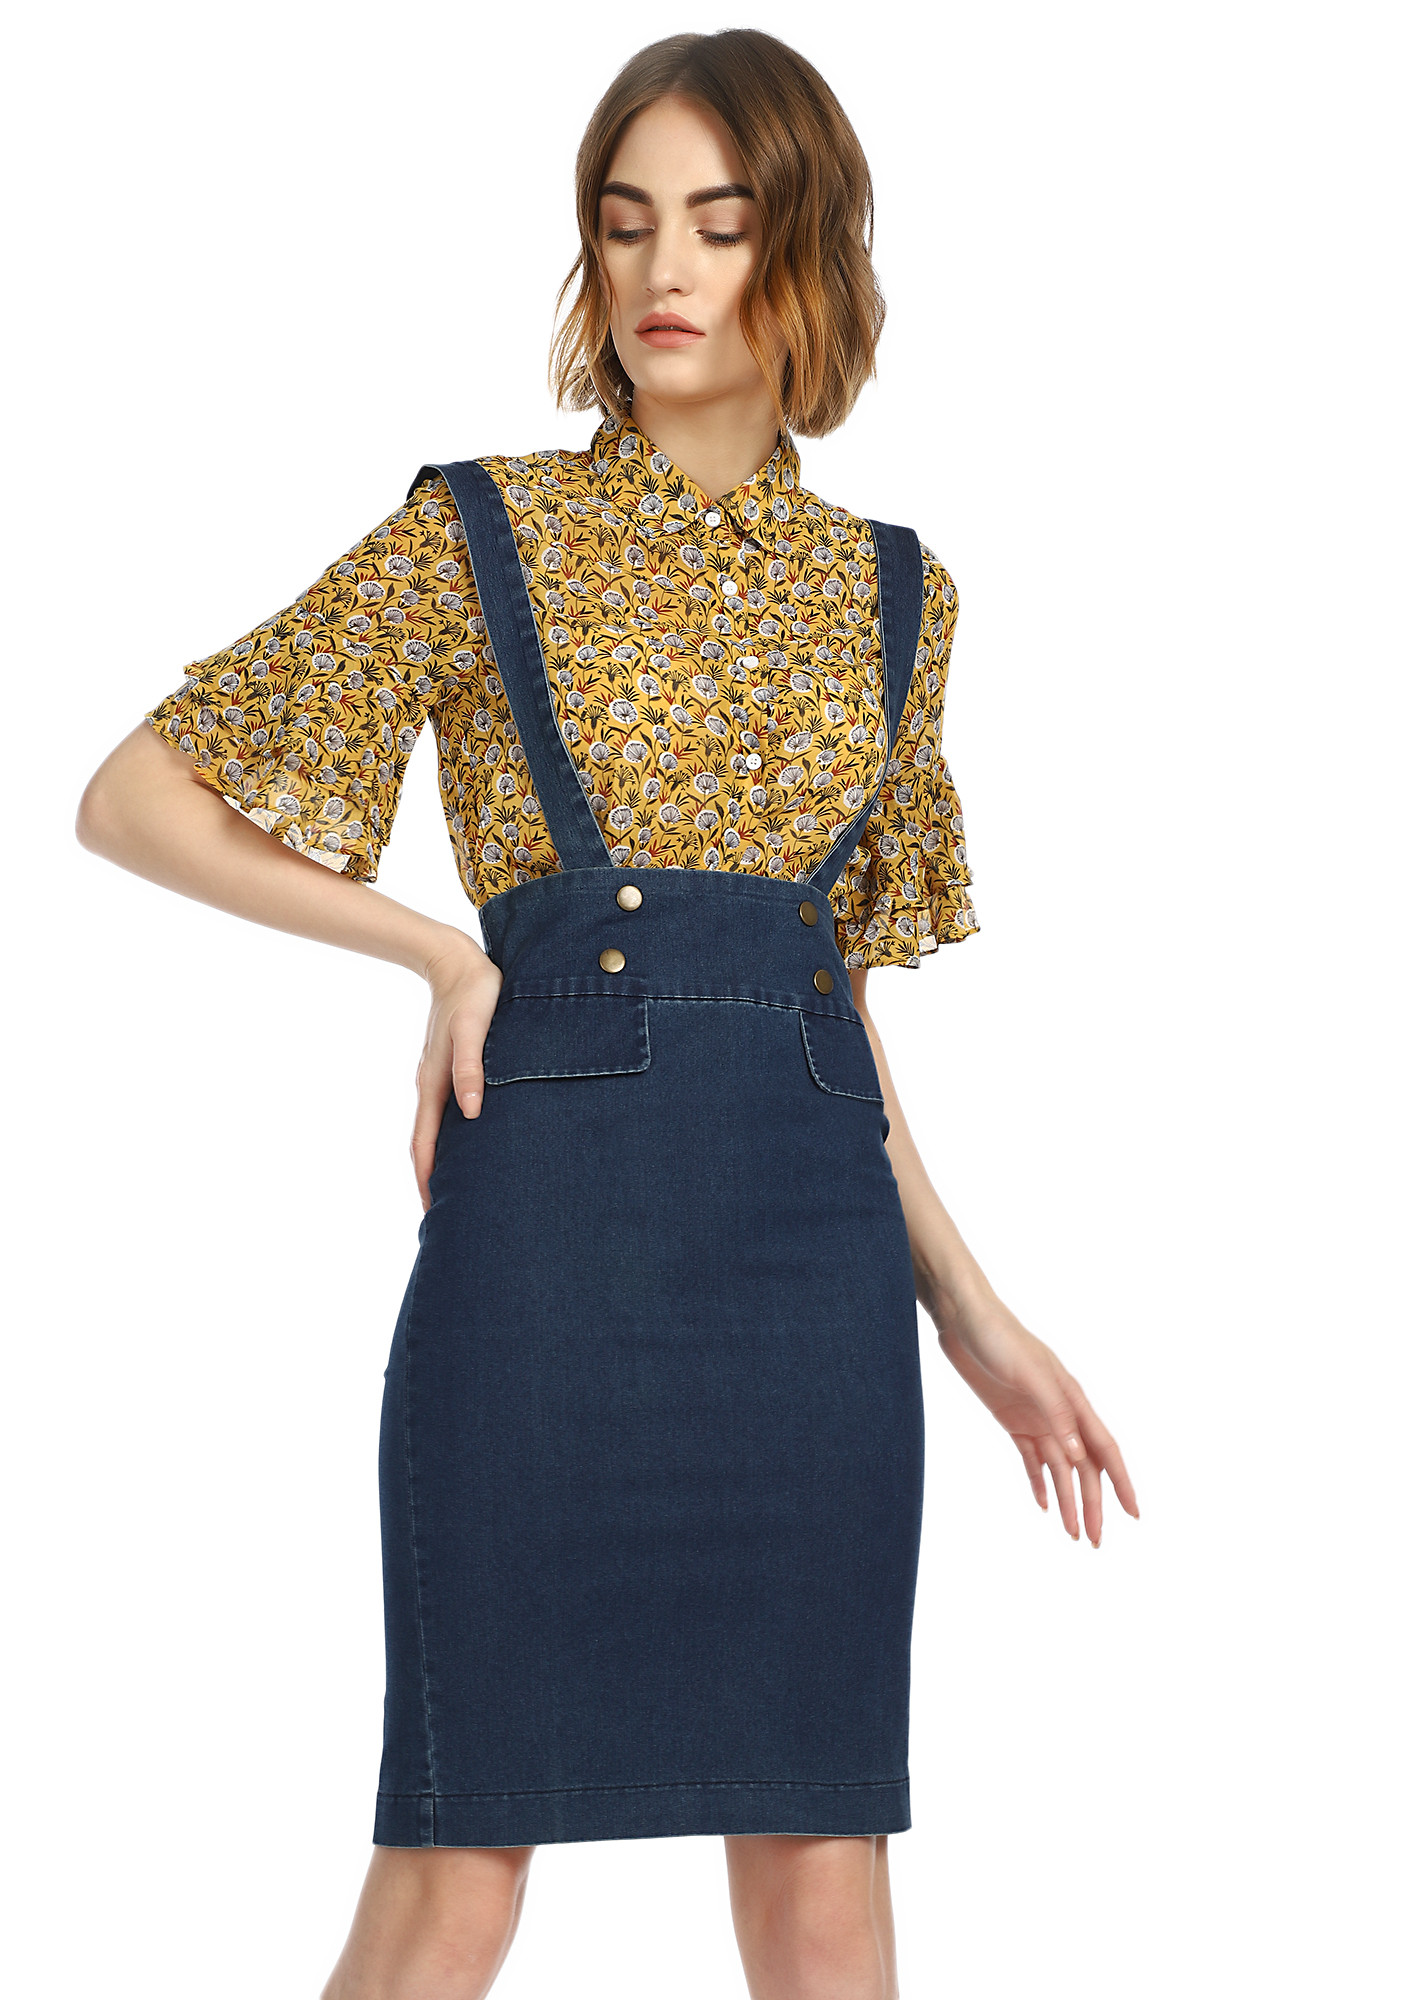 TAKE ME BACK TO SCHOOL BLUE PINAFORE SKIRT